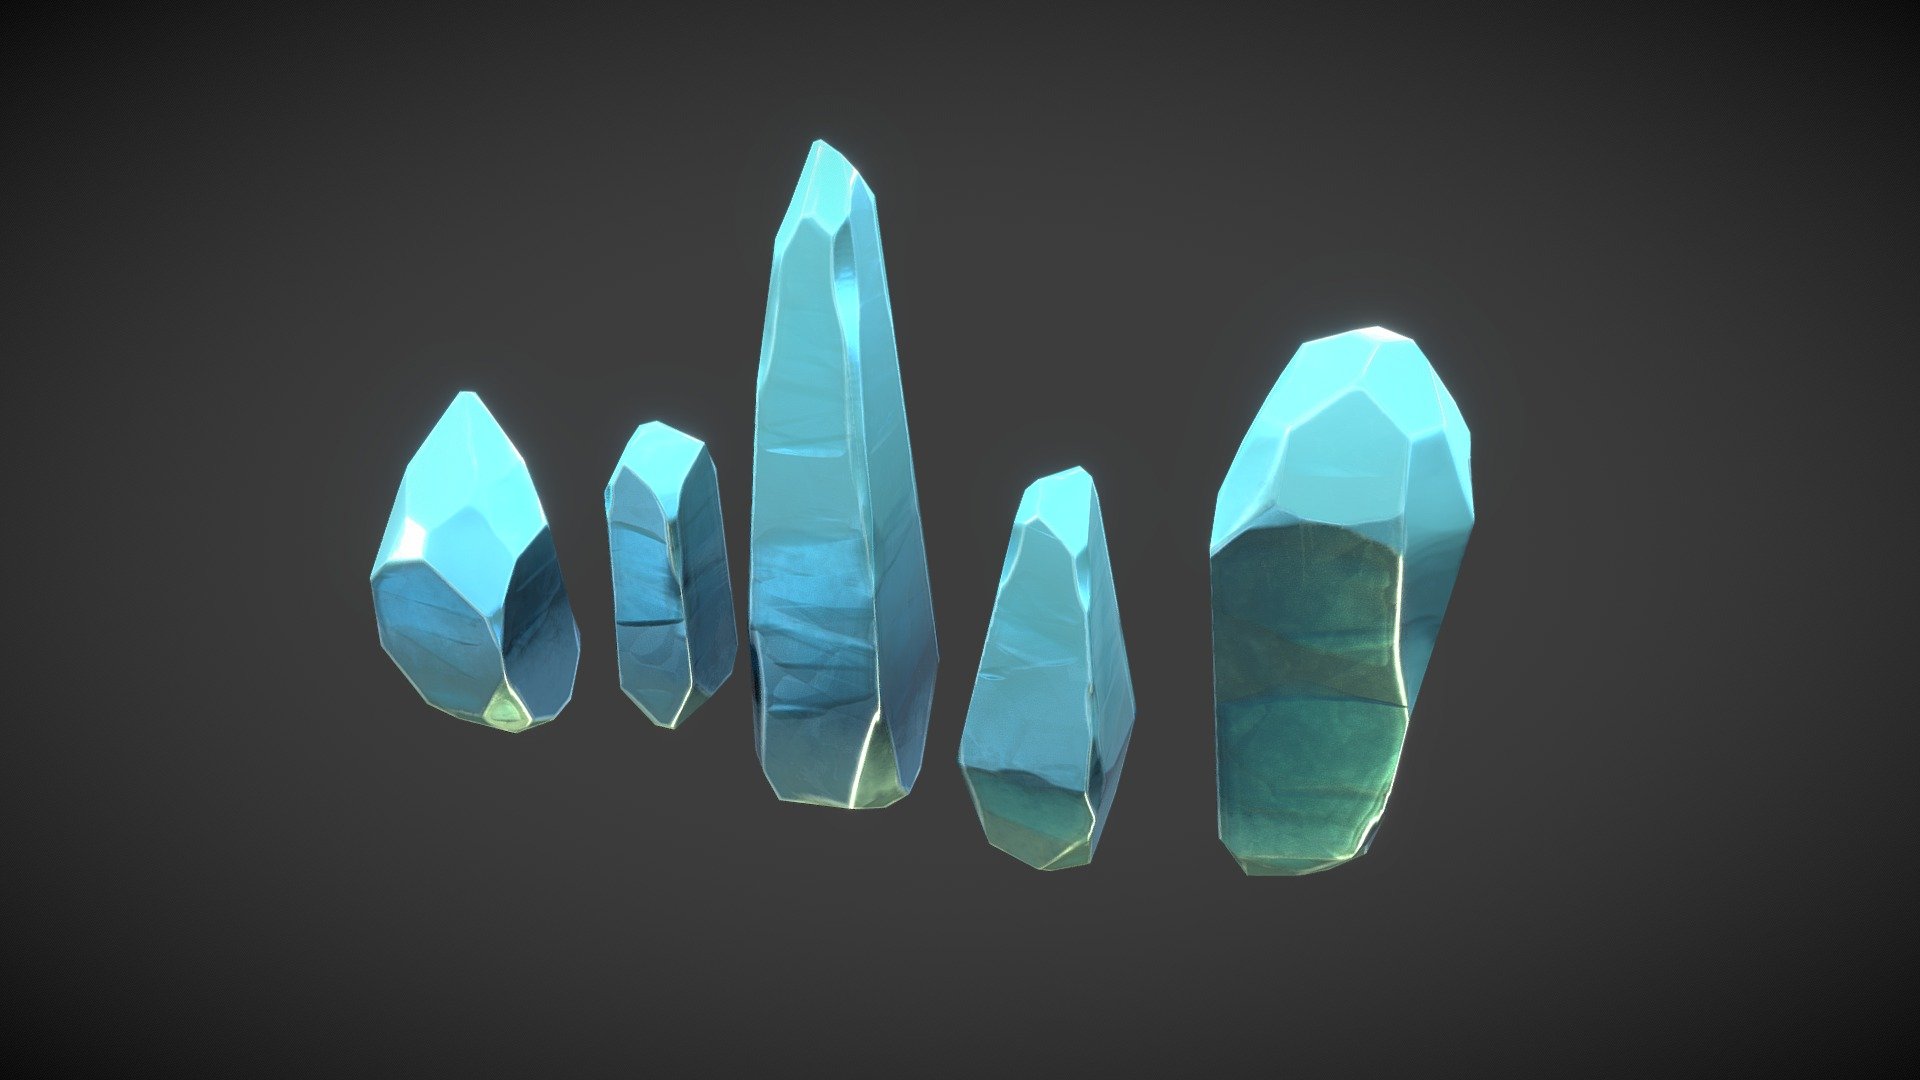 Fantasy Stylized Crystals gameready 3d model, one material set with 2048x2048 texture resolution - Fantasy Stylized Crystals - Download Free 3D model by KZNYKN 3d model